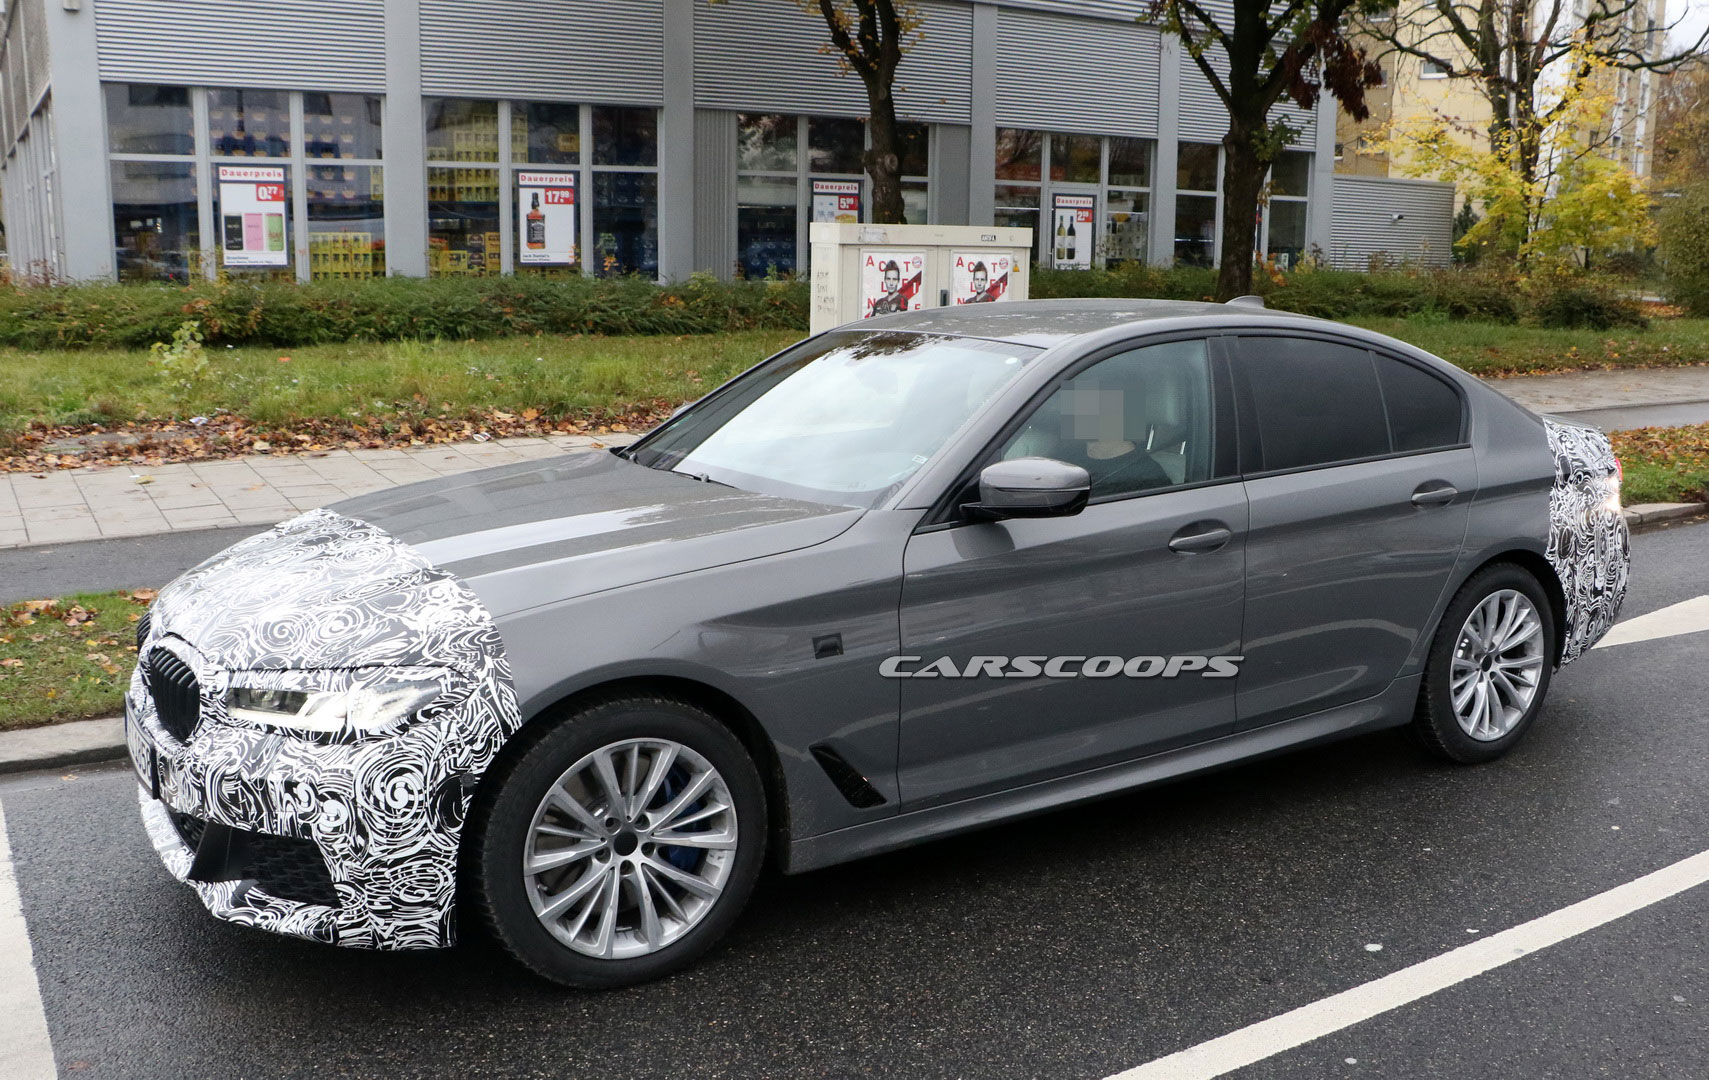 straal in stand houden Voorstel 2020 BMW 5-Series Spied With M Sport Pack, Decent-Sized Grille | Carscoops